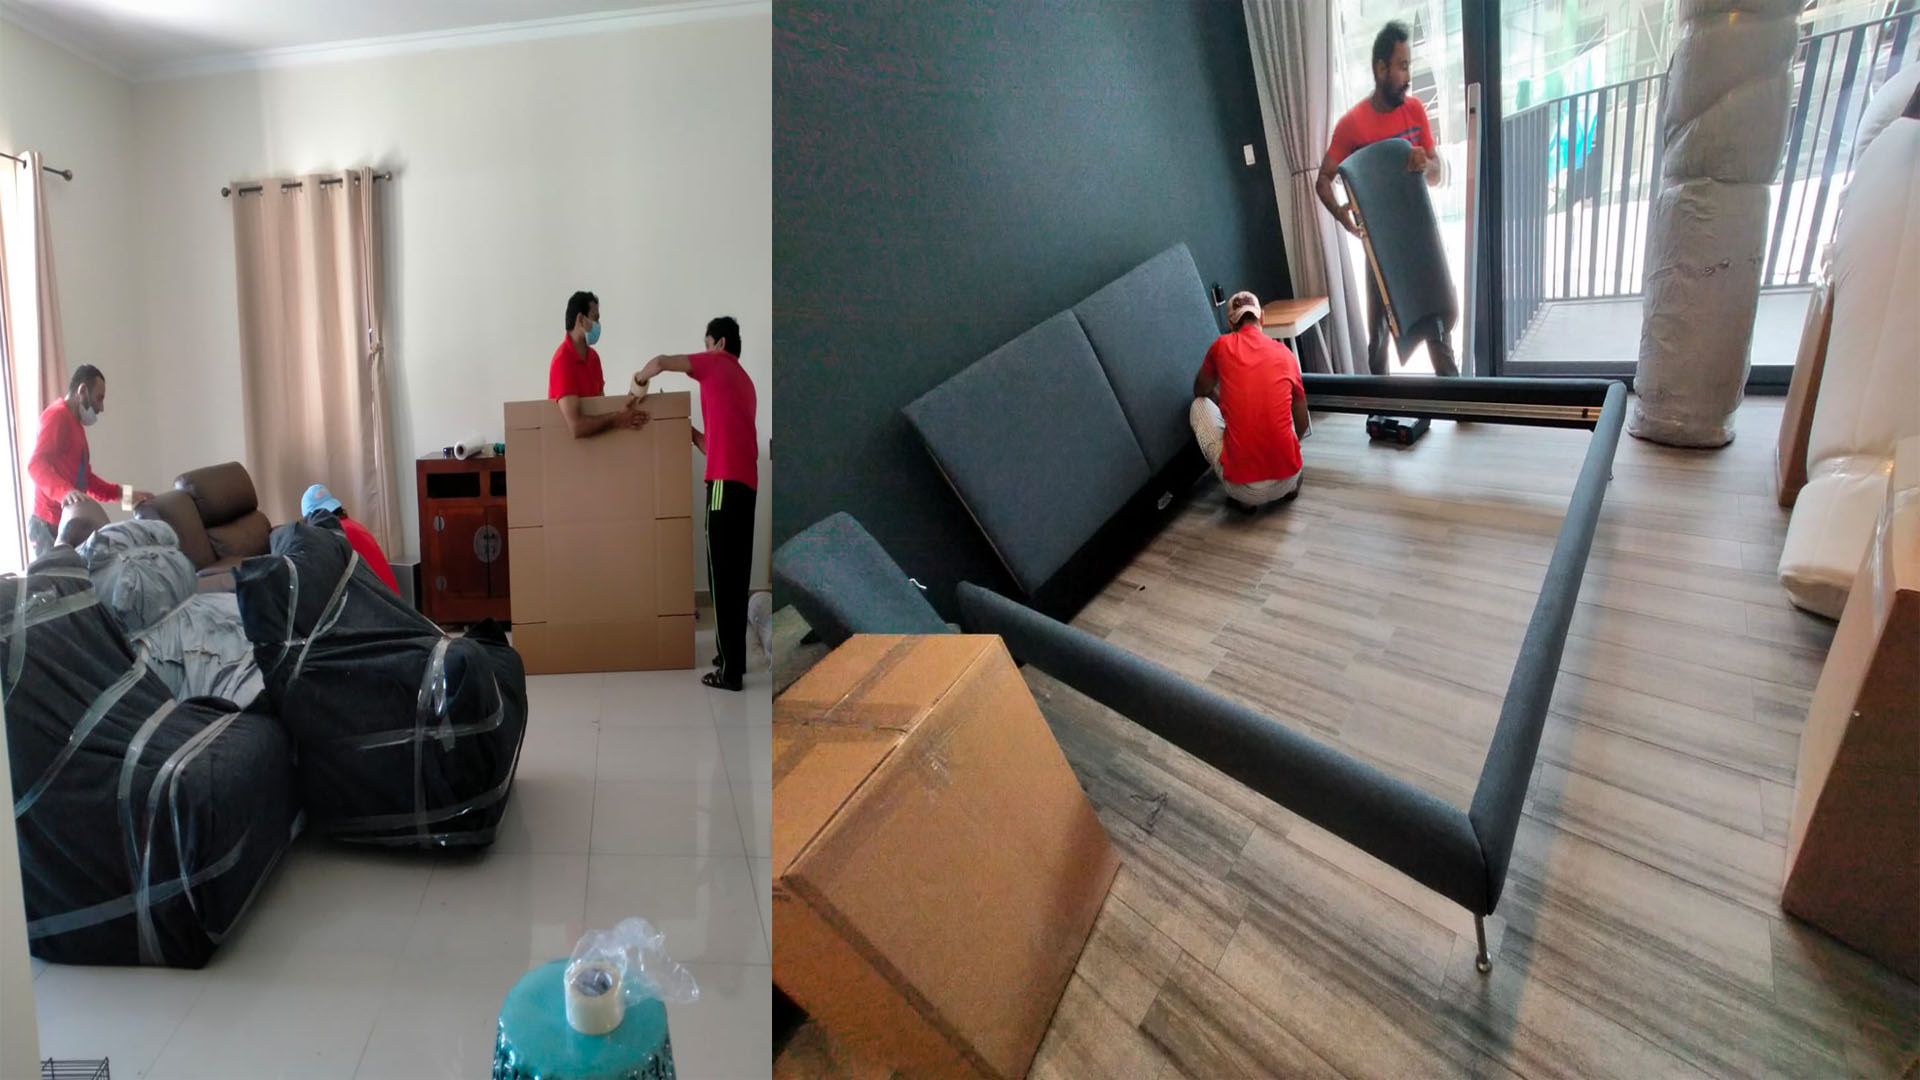 Movers in JLT, Movers and Packers in Dubai